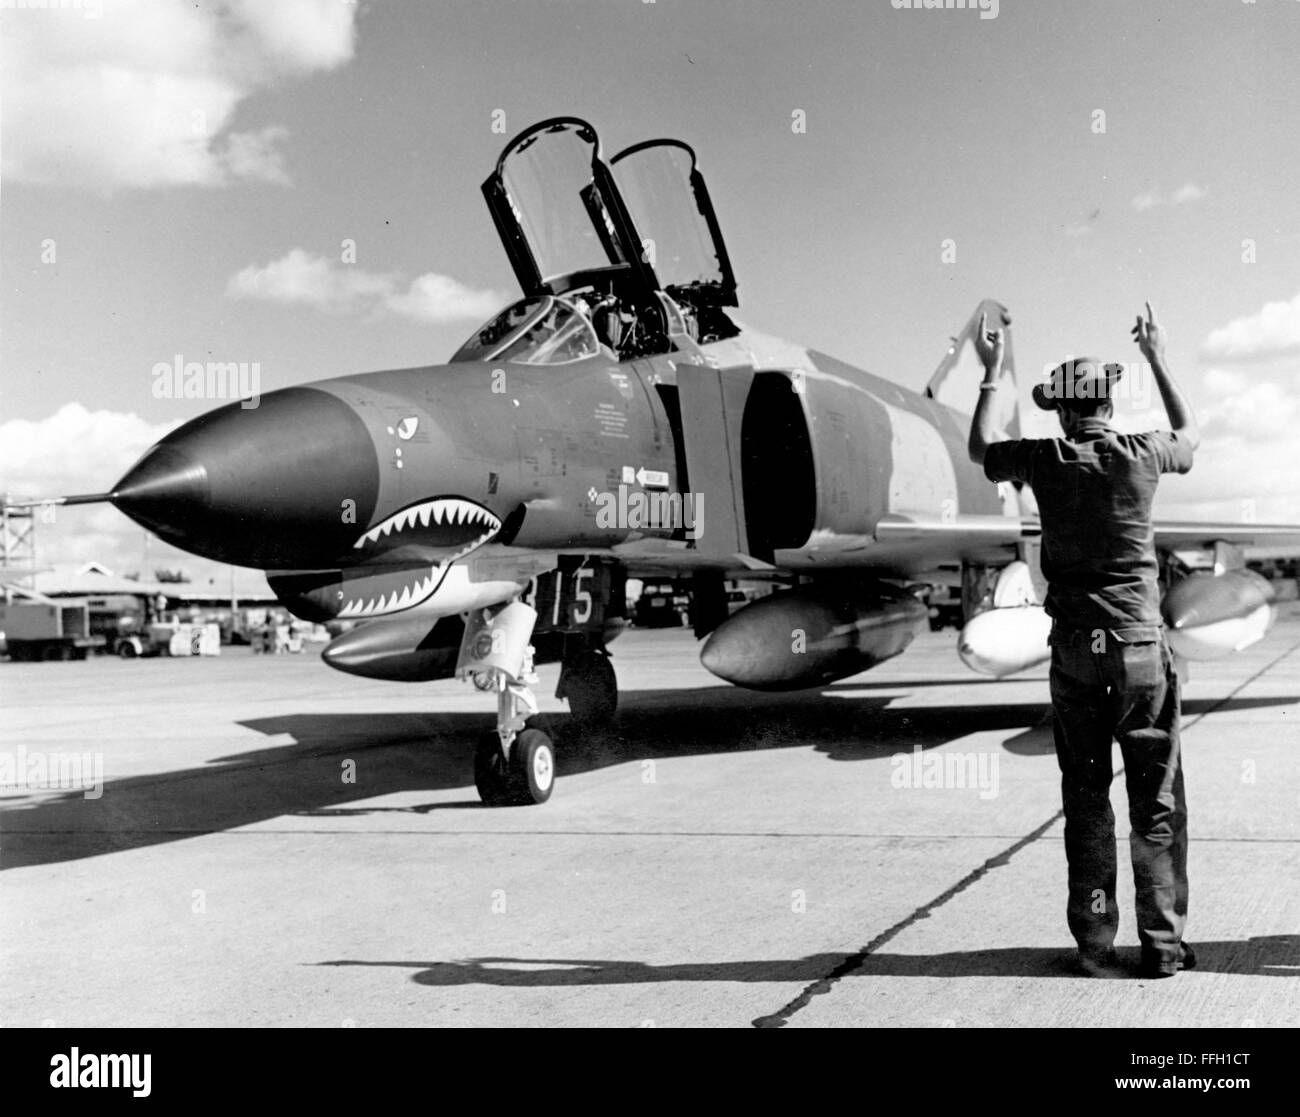 The F-4E Phantom II had many improvements over earlier F-4s models, most notably its internal 20mm gun. The first F-4Es arrived in Southeast Asia in late 1968. Stock Photo